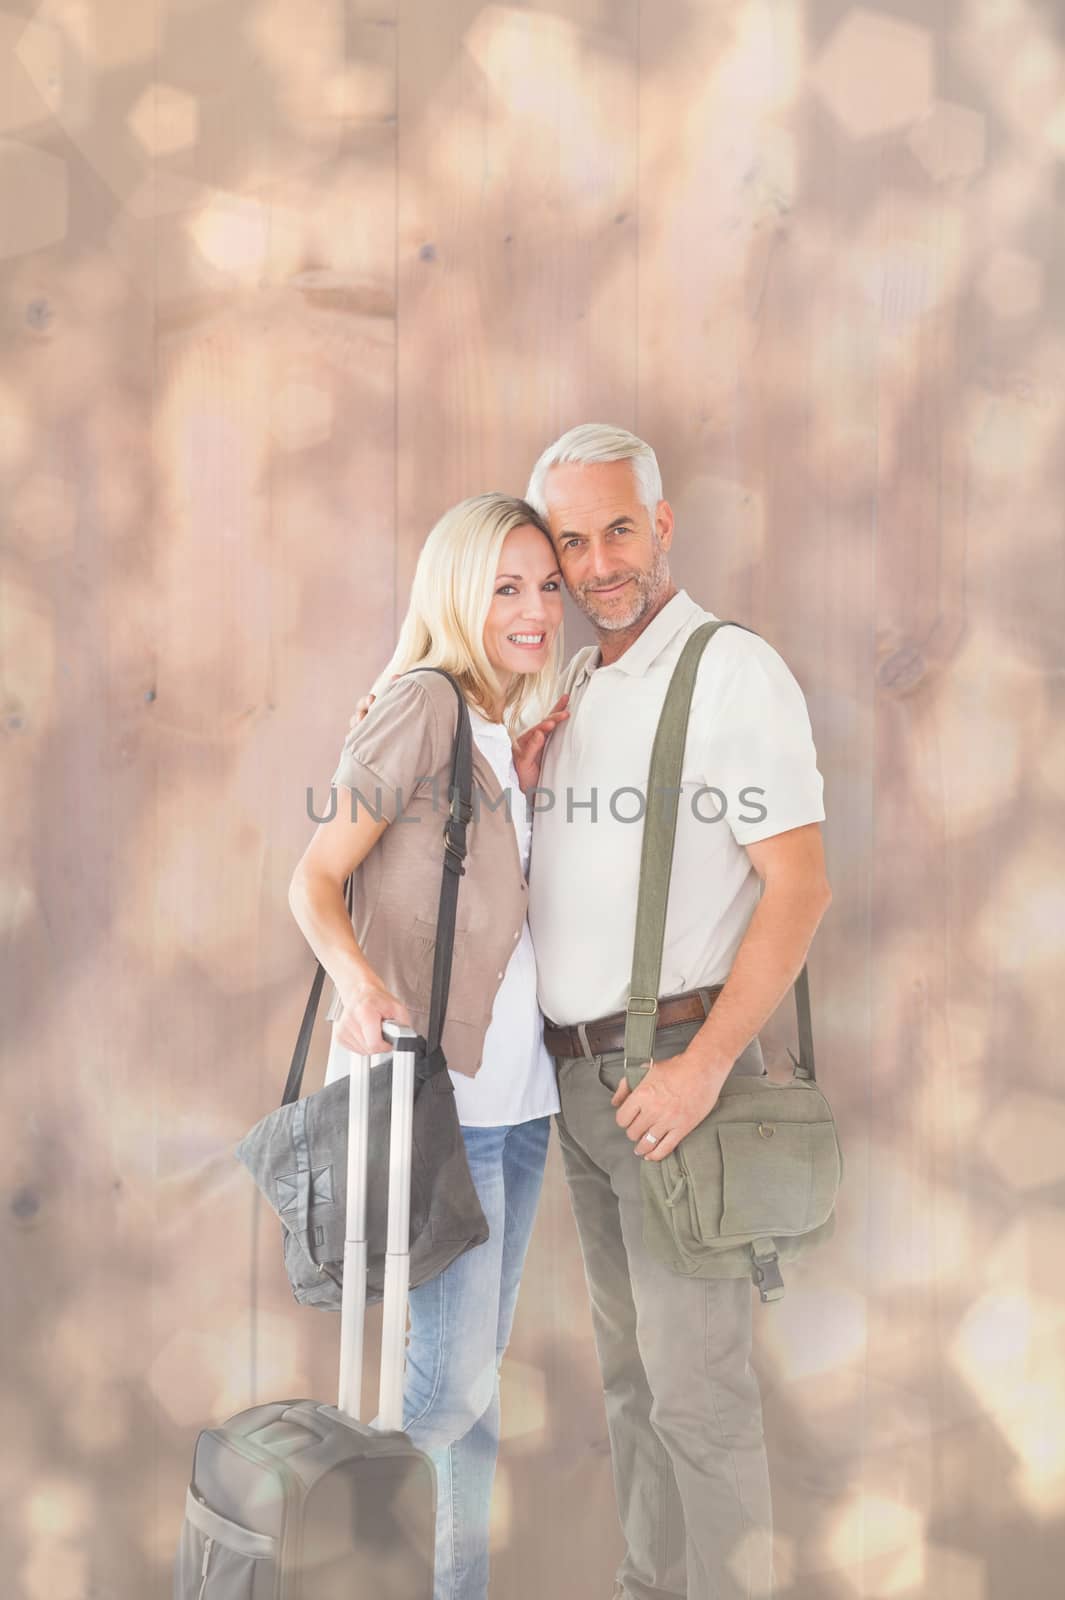 Happy couple ready to go on holiday against light glowing dots design pattern